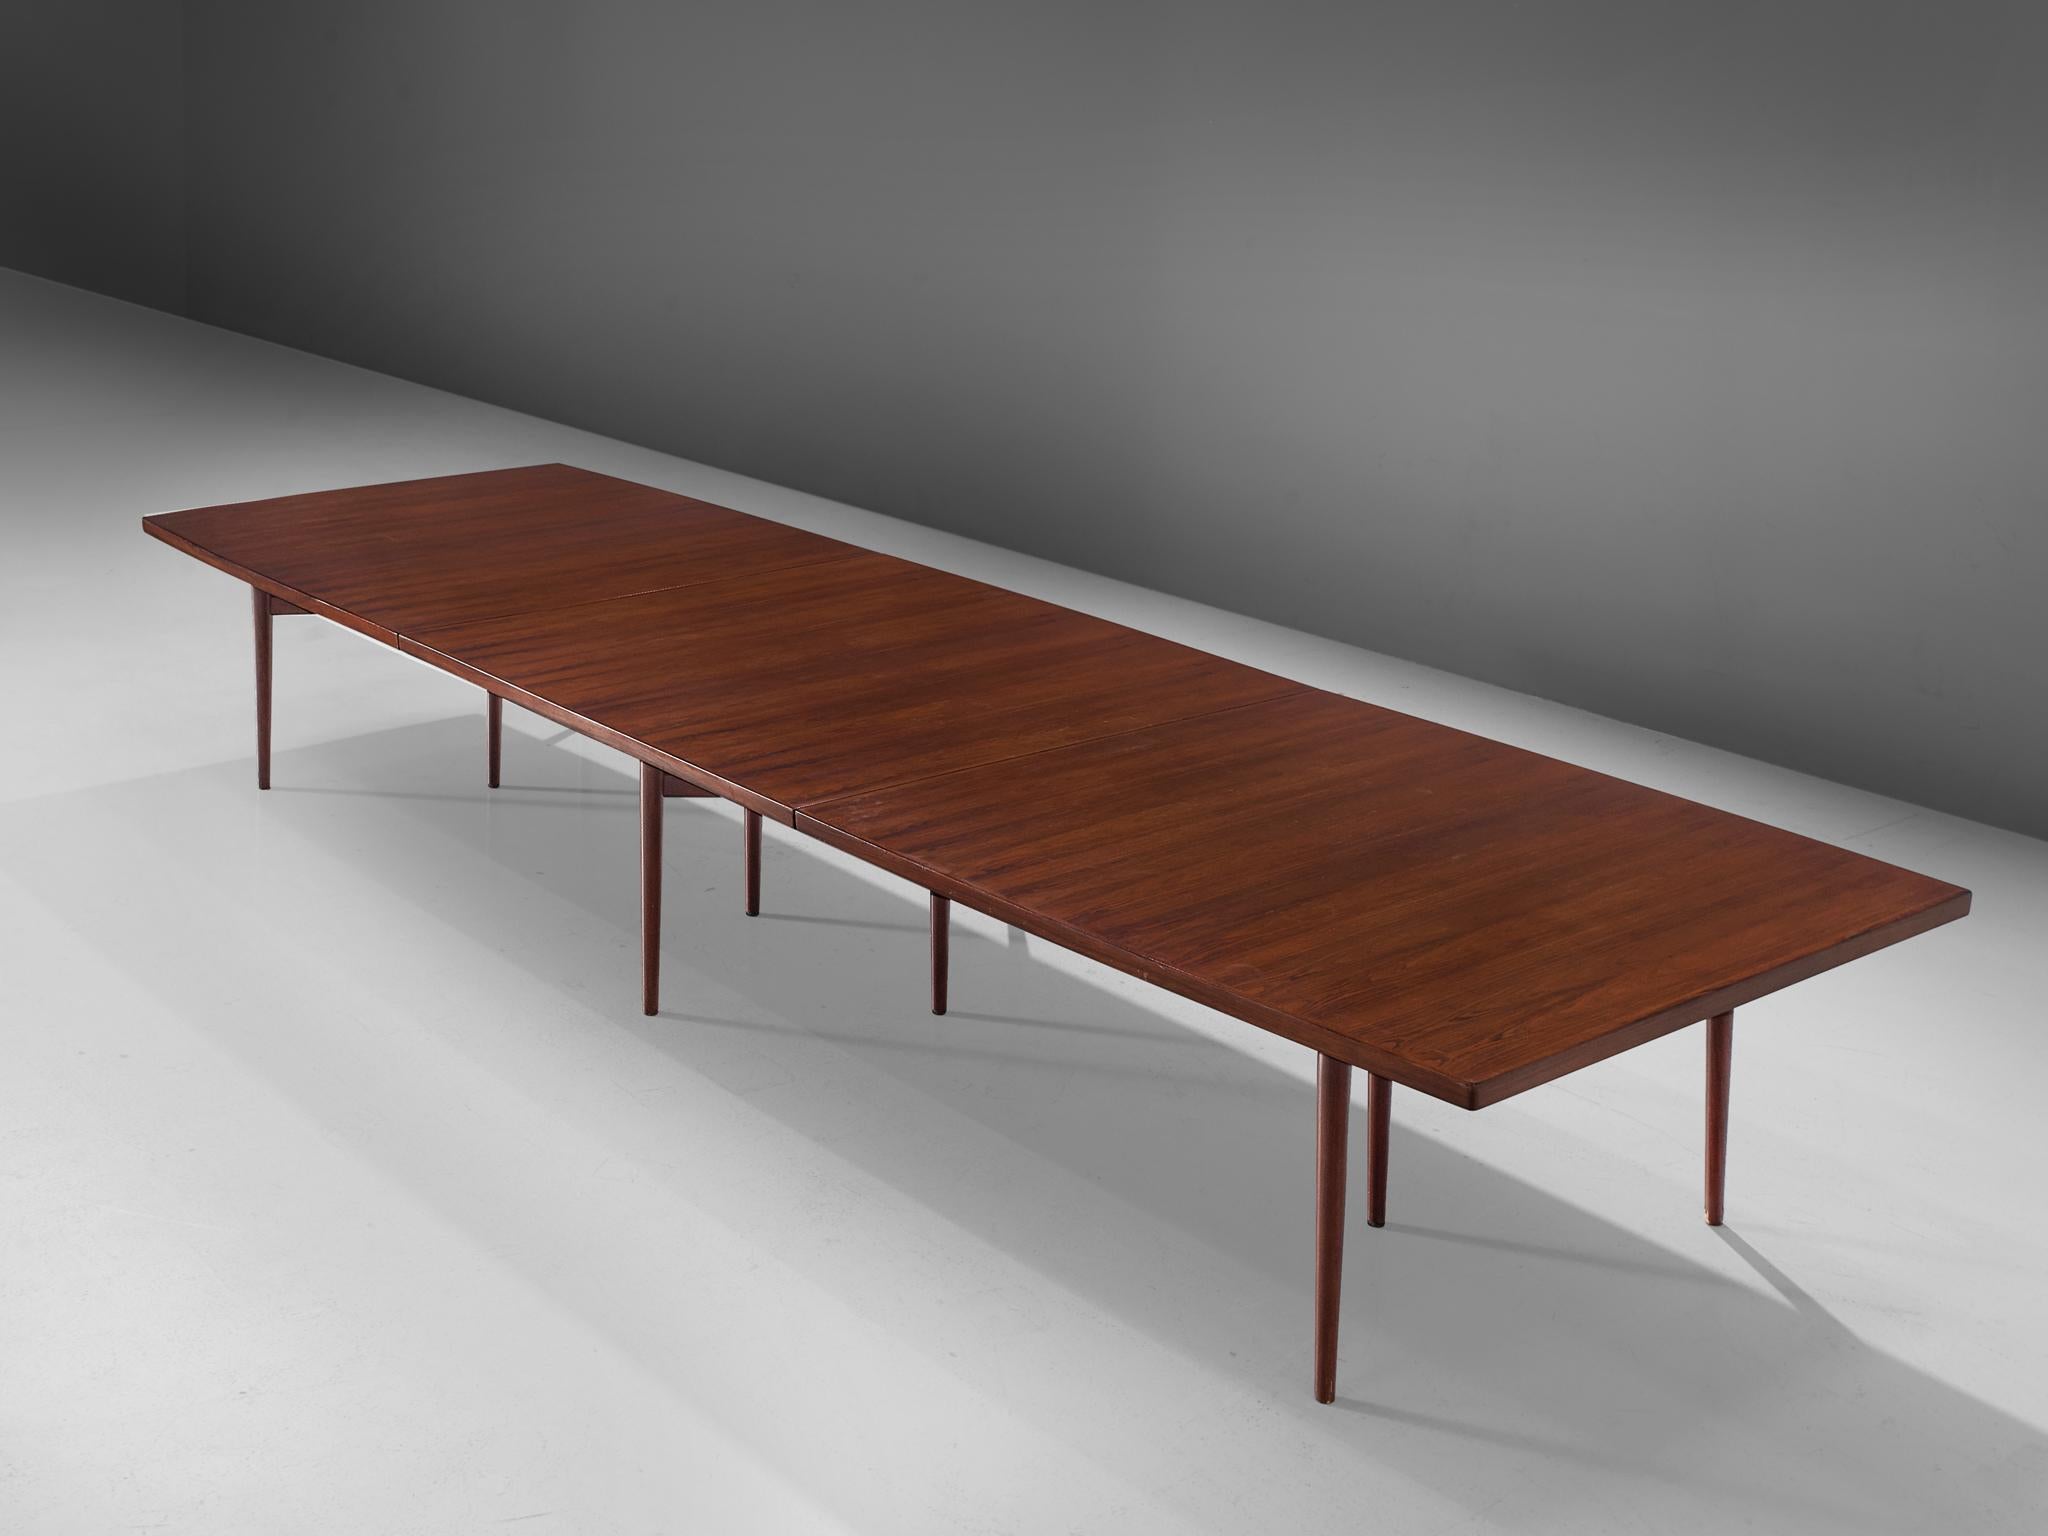 Arne Vodder for Sibast Furniture, rosewood, dining table, Denmark, 1960s.

This dining table or conference table is executed with rosewood veneer. The straight top that is made out of three pieces is supported with a sculptural frame that has three